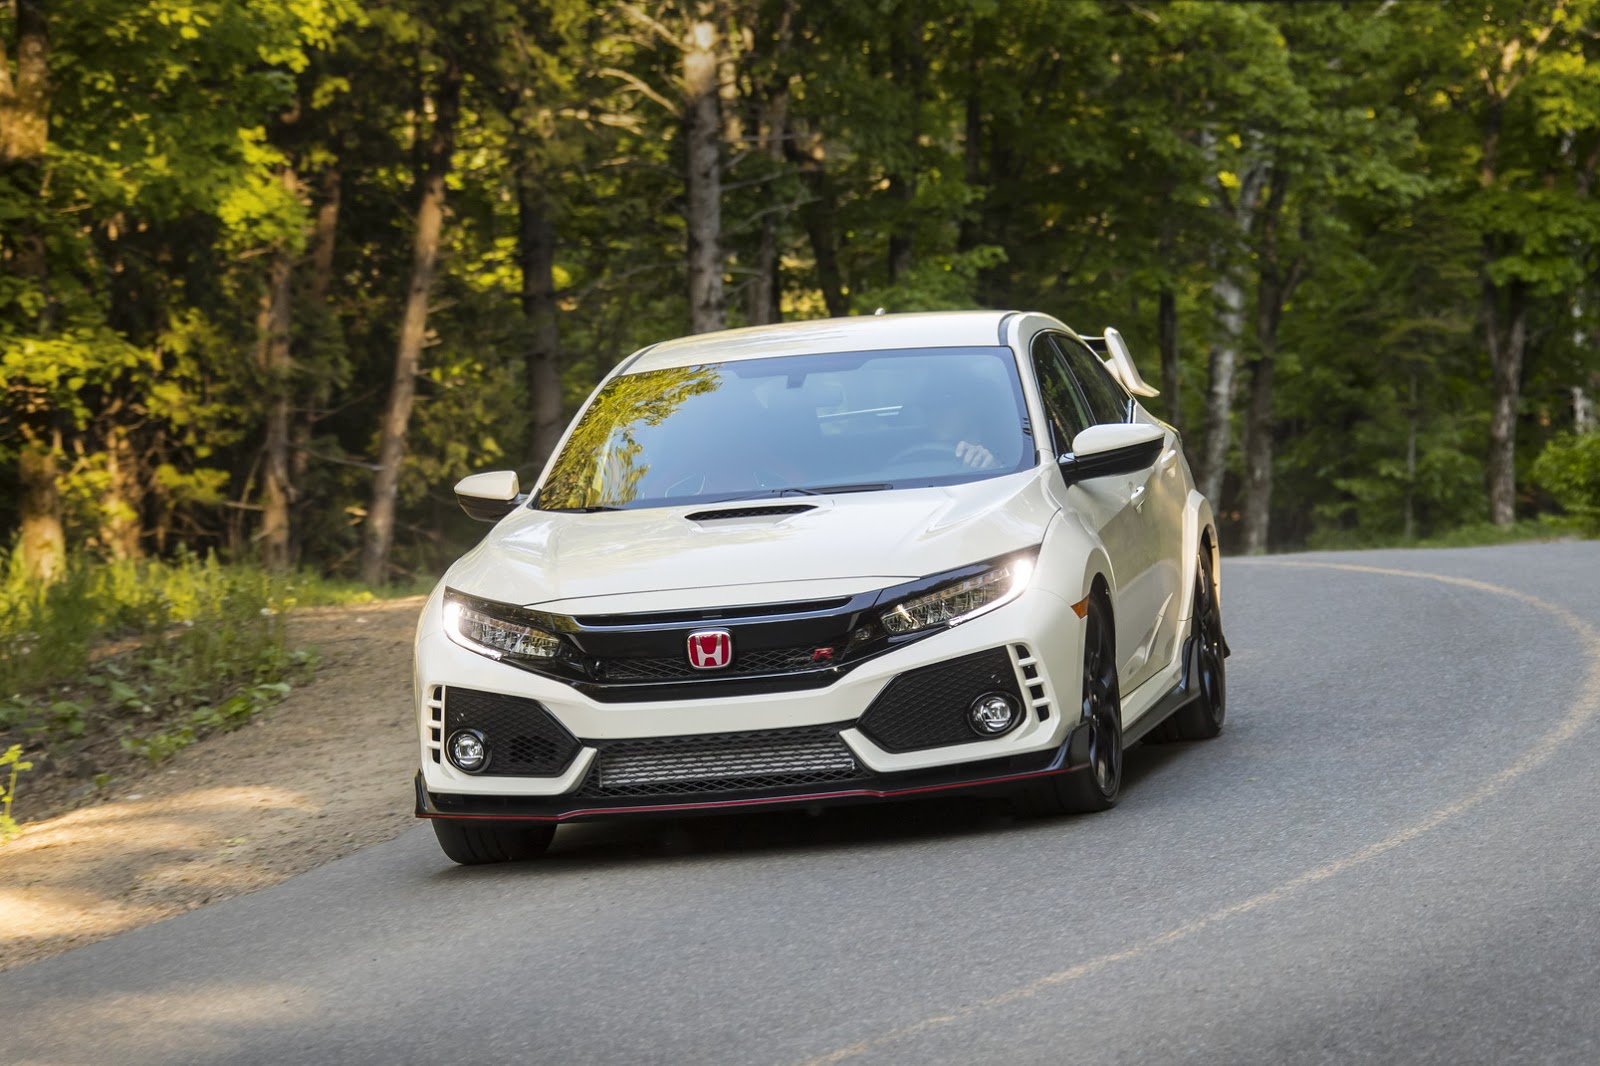 Honda's U.S. Dealers Charging Up To $30k Over MSRP For The Honda Civic